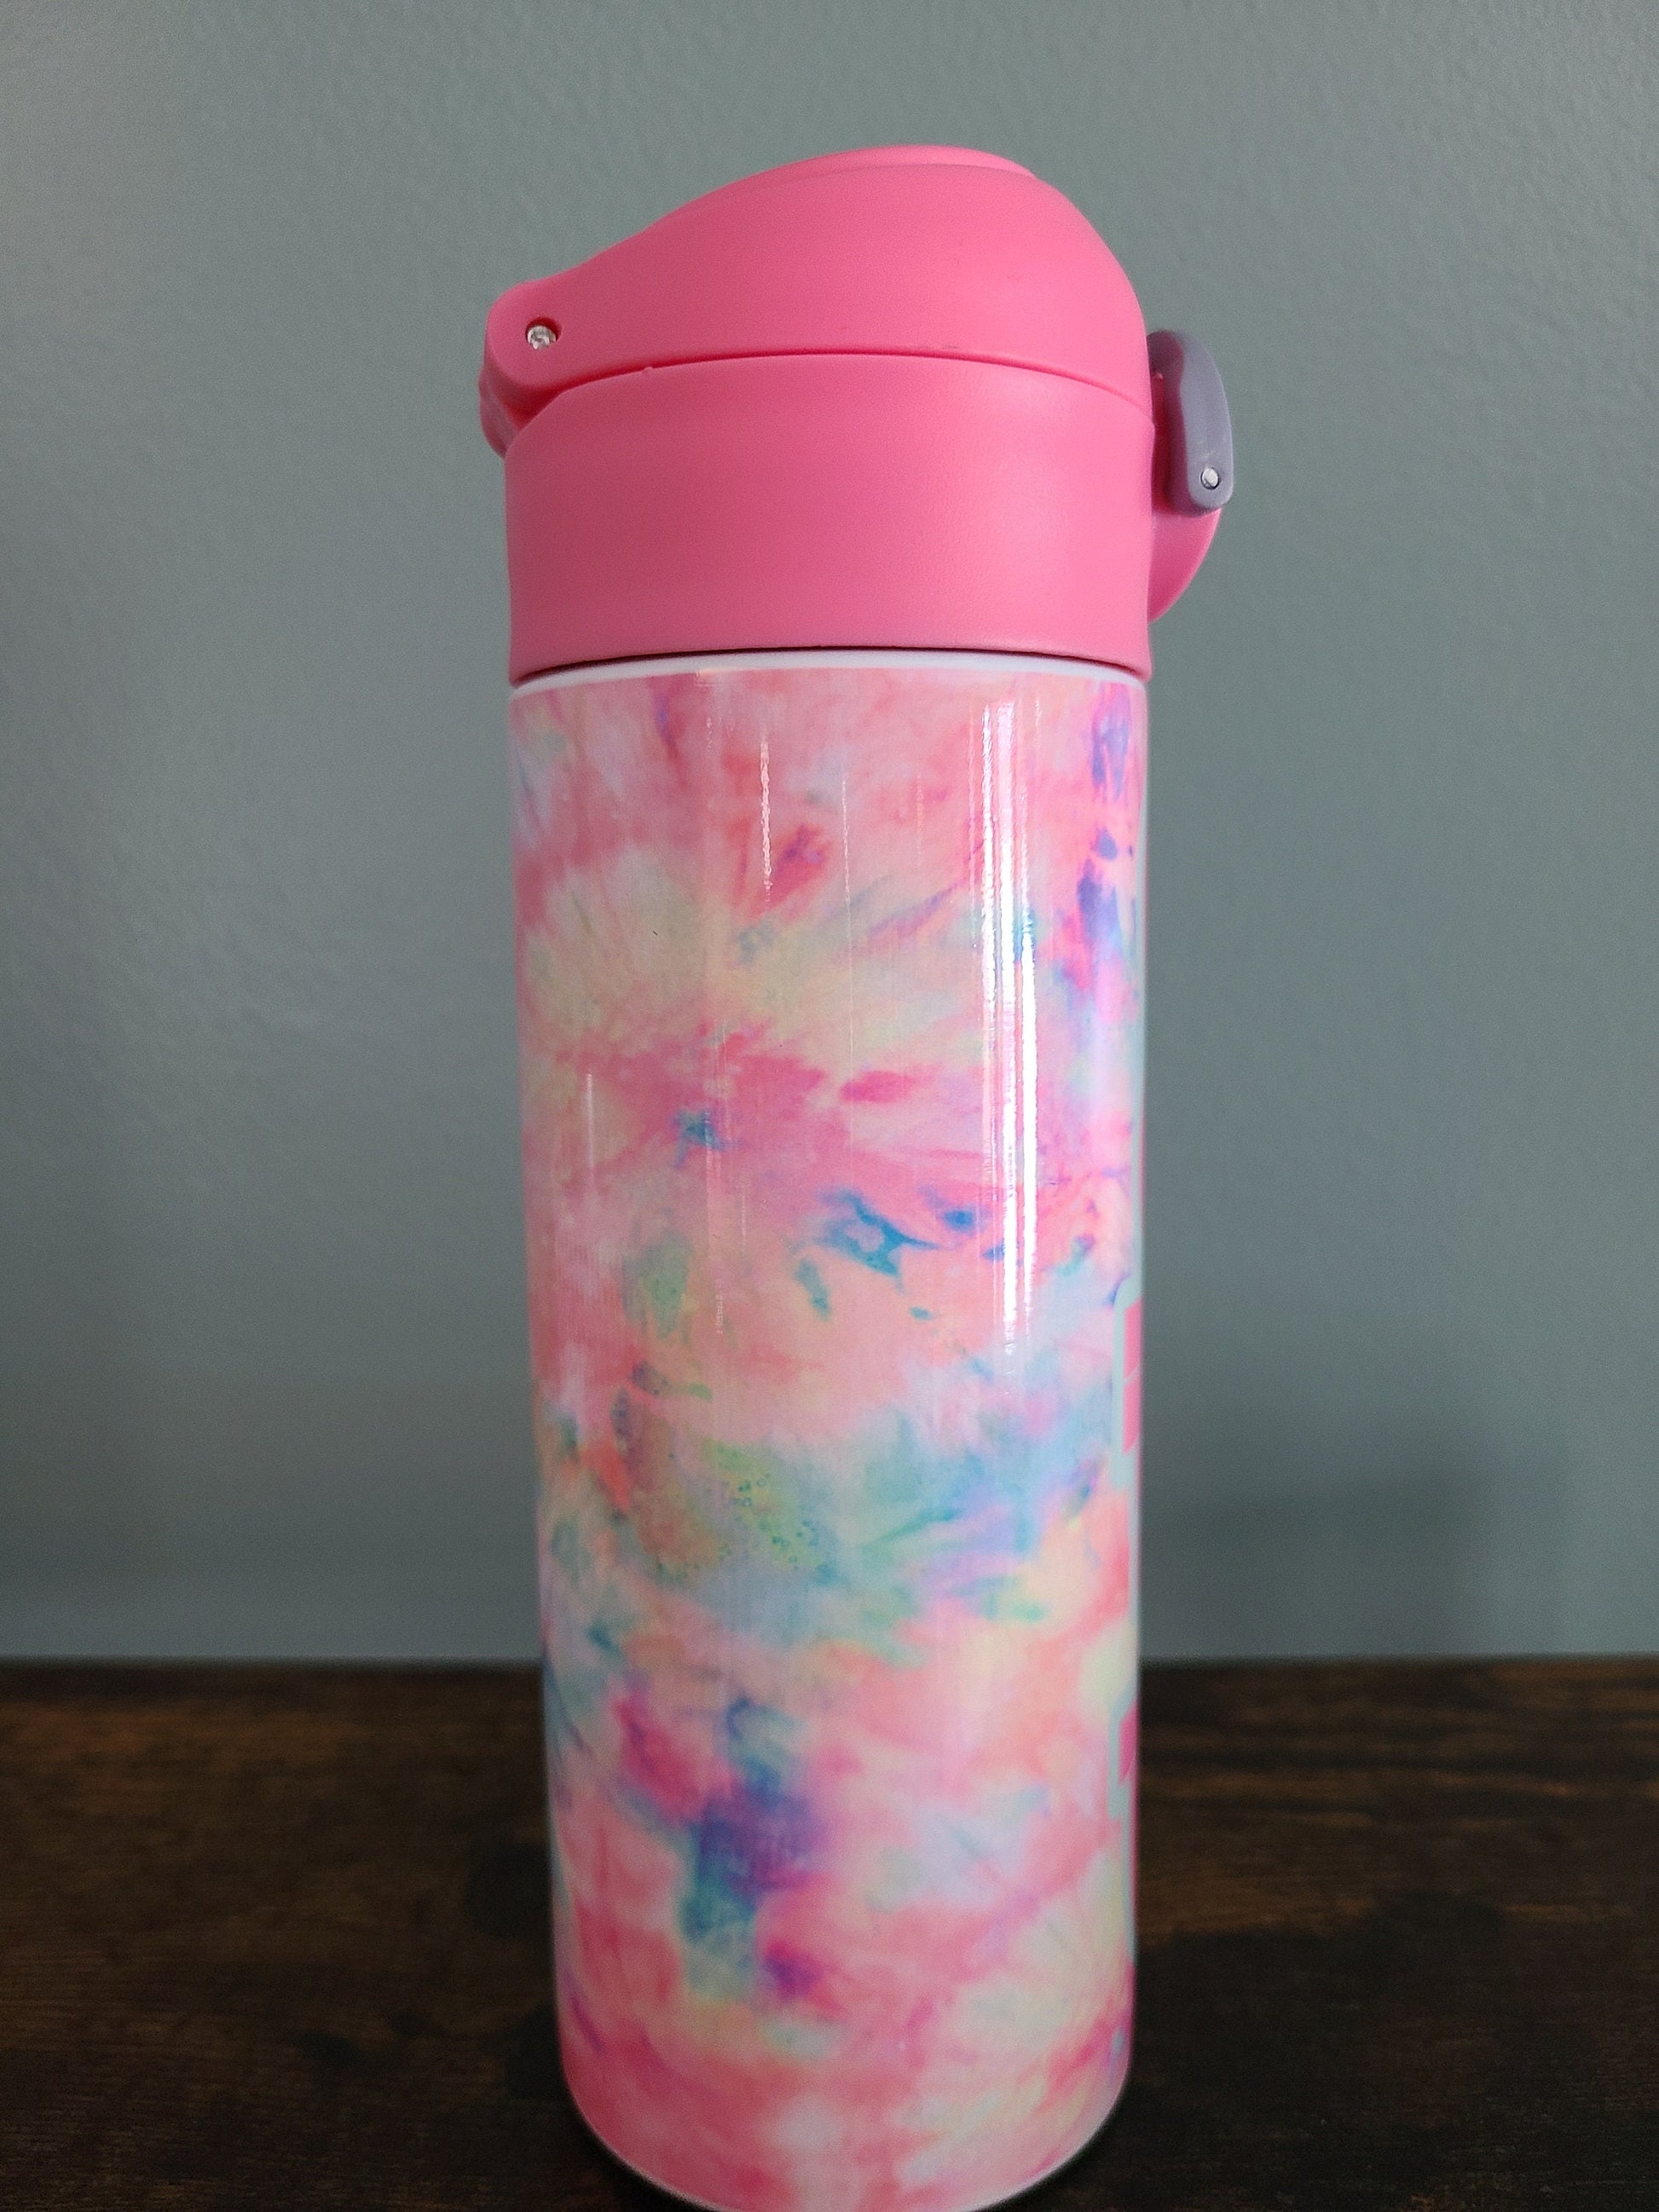 12 oz water bottle with flip top and built in straw. Pink tie dye themed water bottle for kids. Back to school water bottle for kids. Tie dye in pastel colors with a name in pink and pink lid.